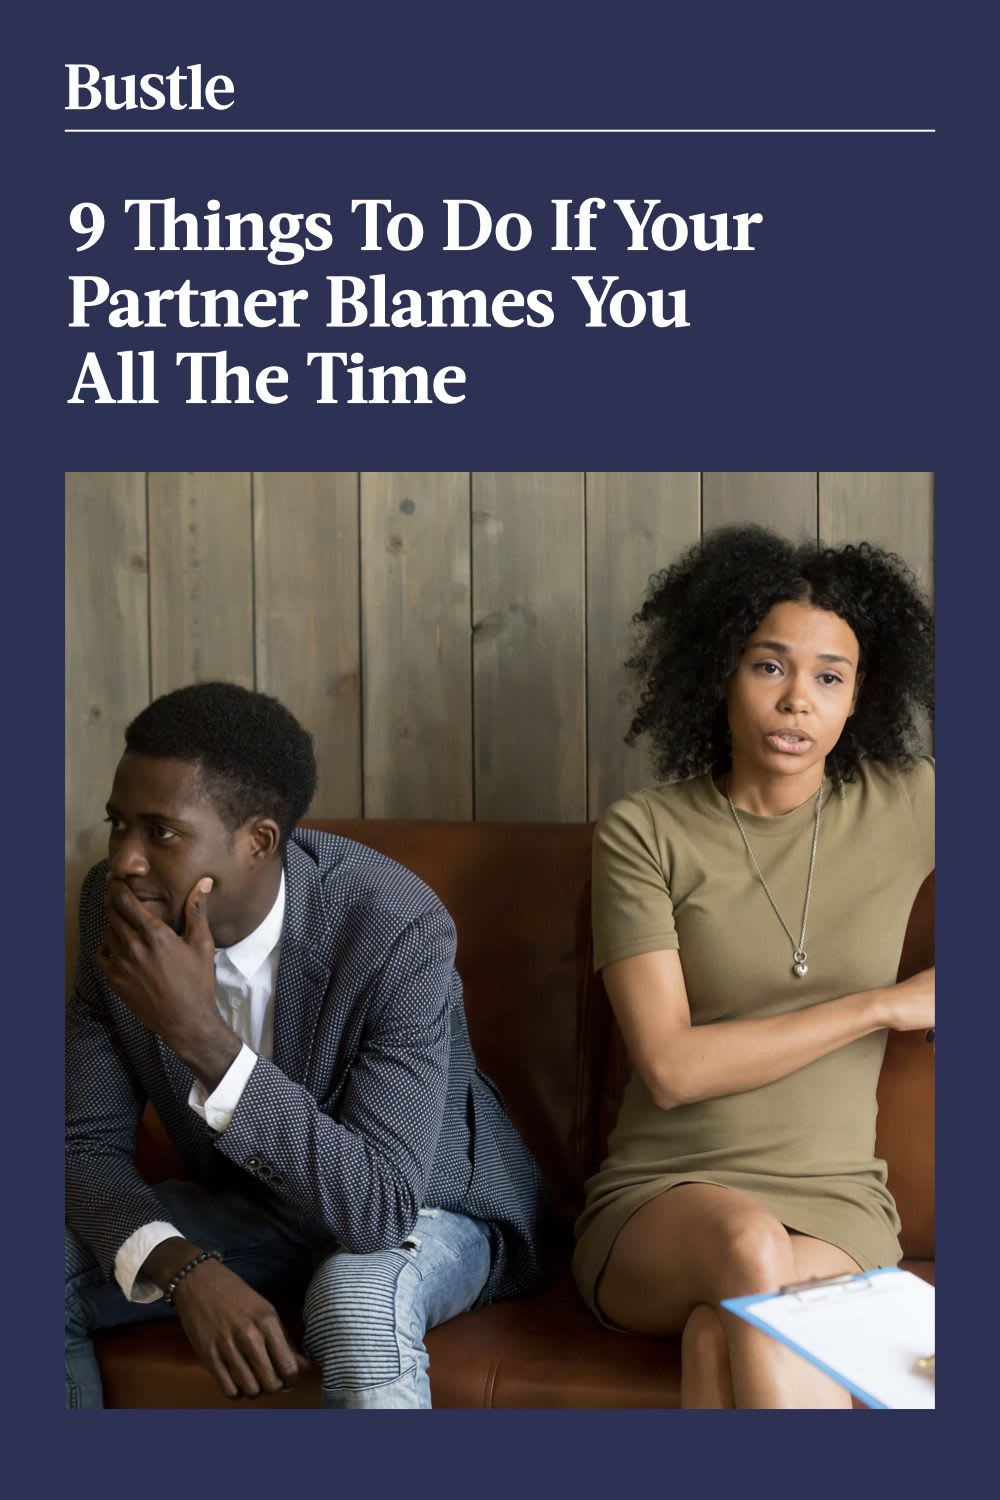 9 Things To Do If Your Partner Blames You All The Time